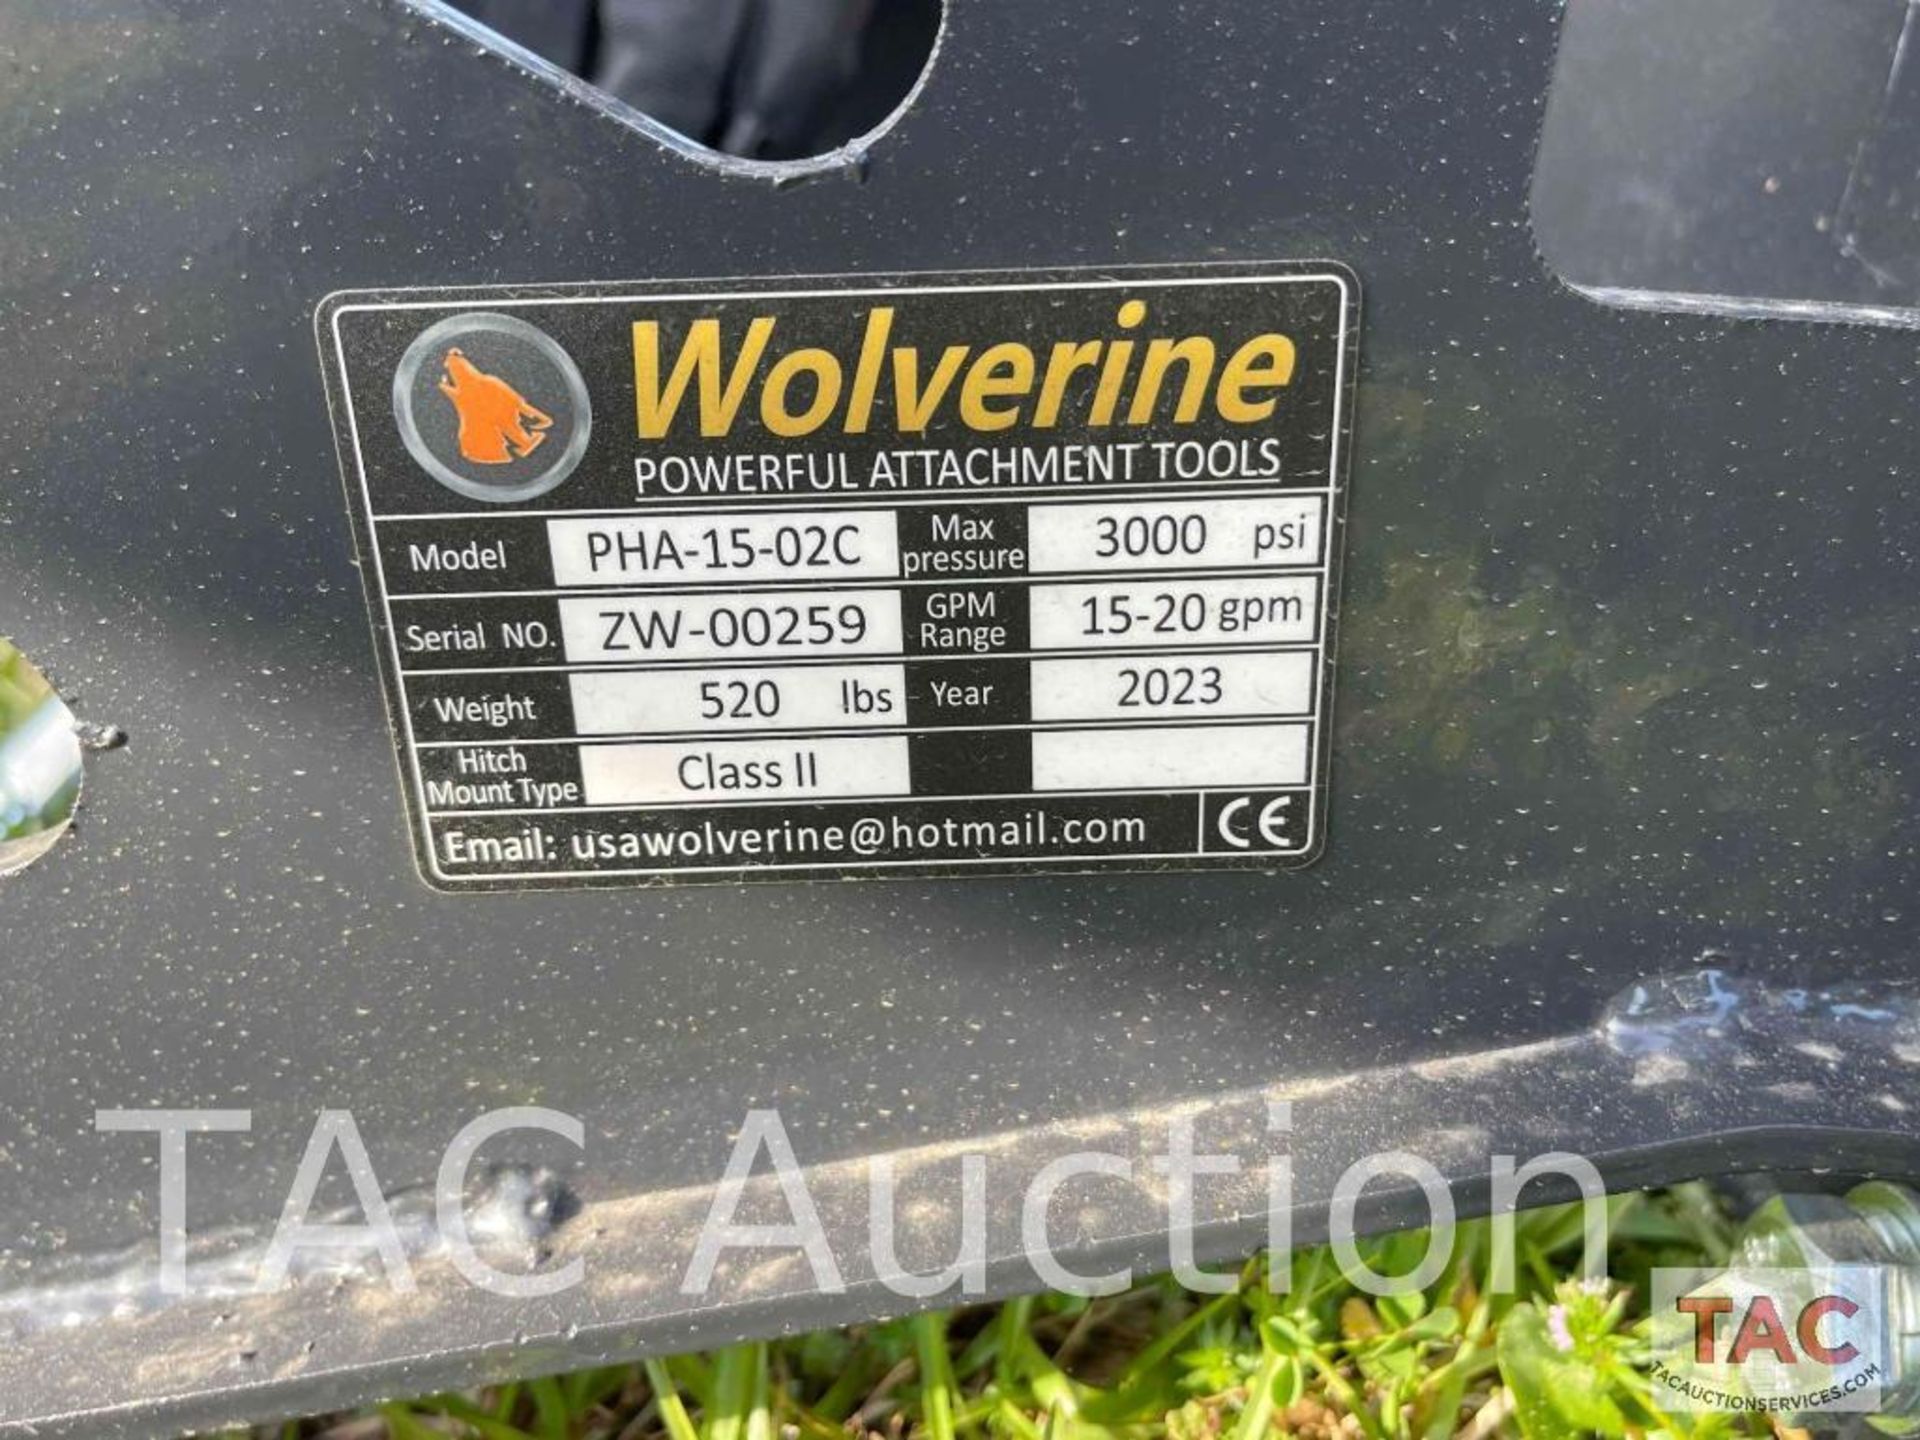 New 2023 Wolverine Skid Steer 3 Point Hitch Adapter - Image 4 of 4